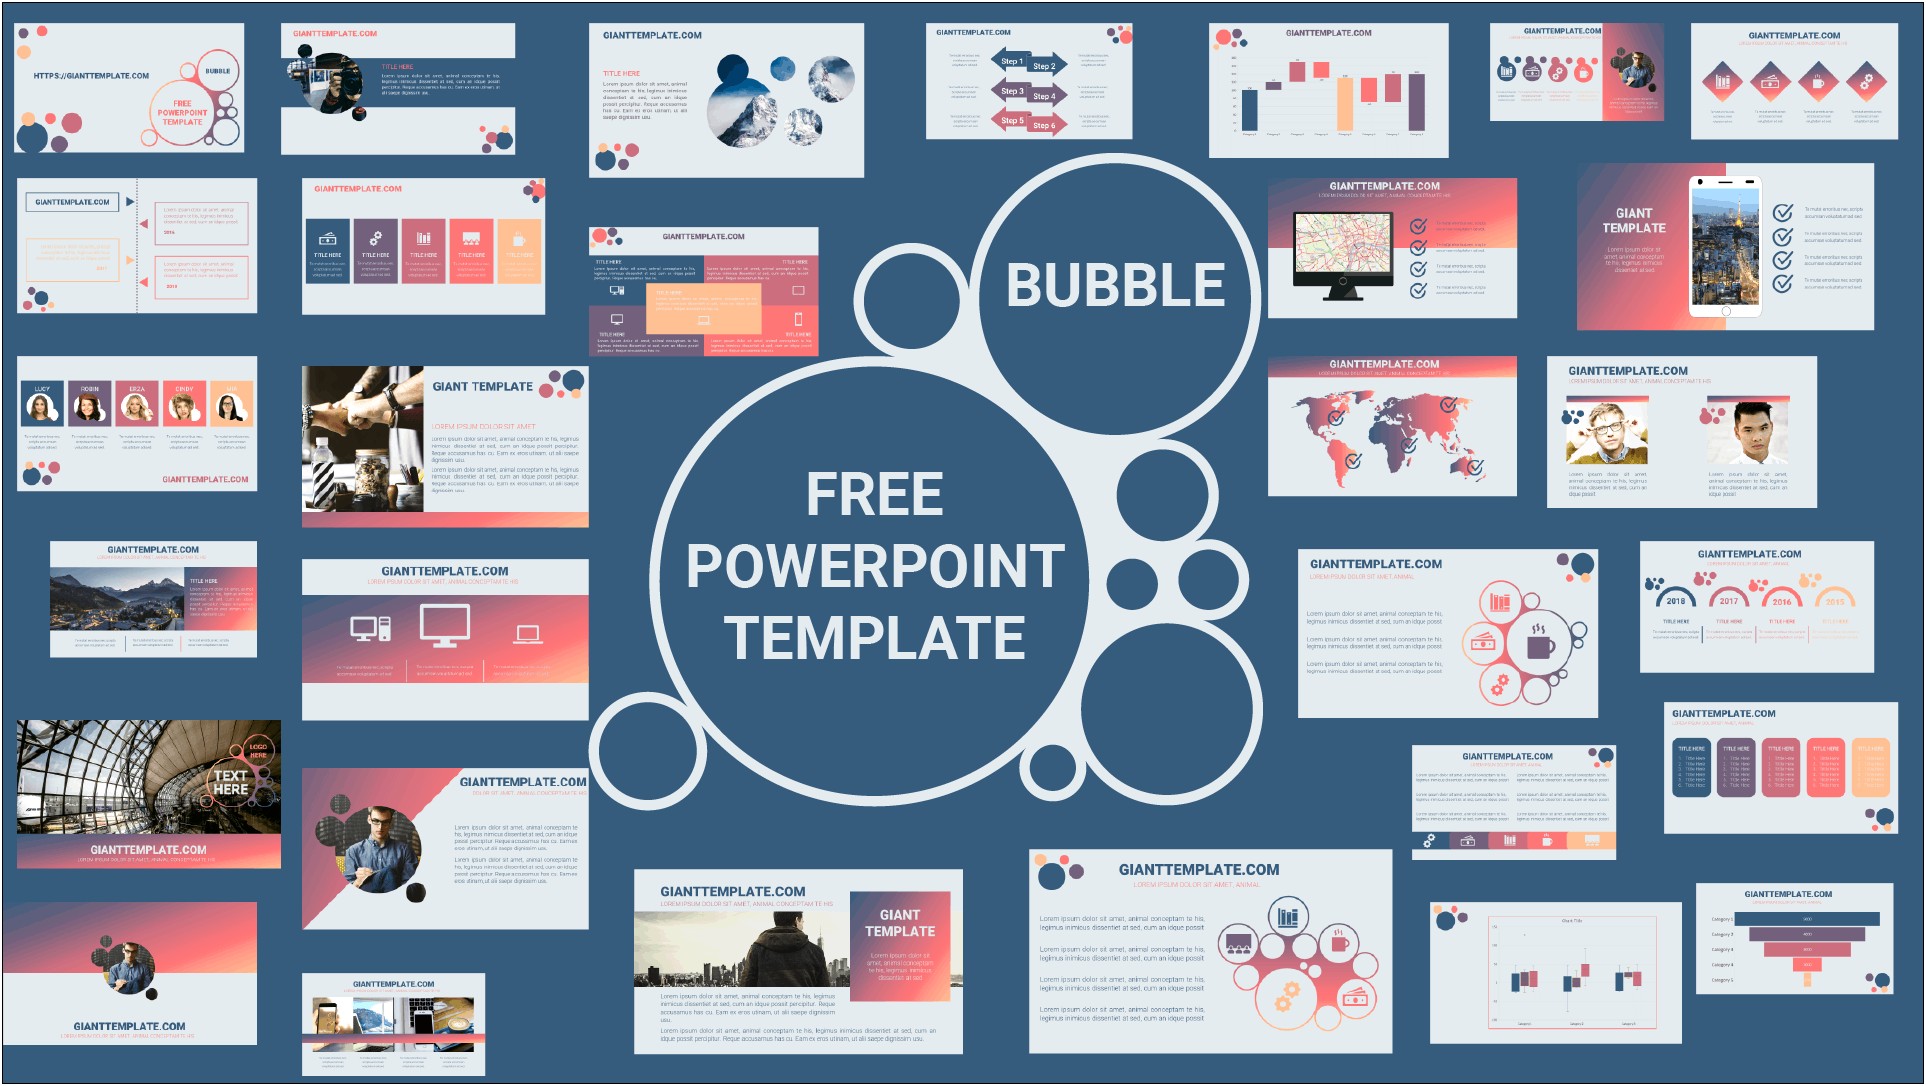 Microsoft Powerpoint 2007 Animated Template Free Download